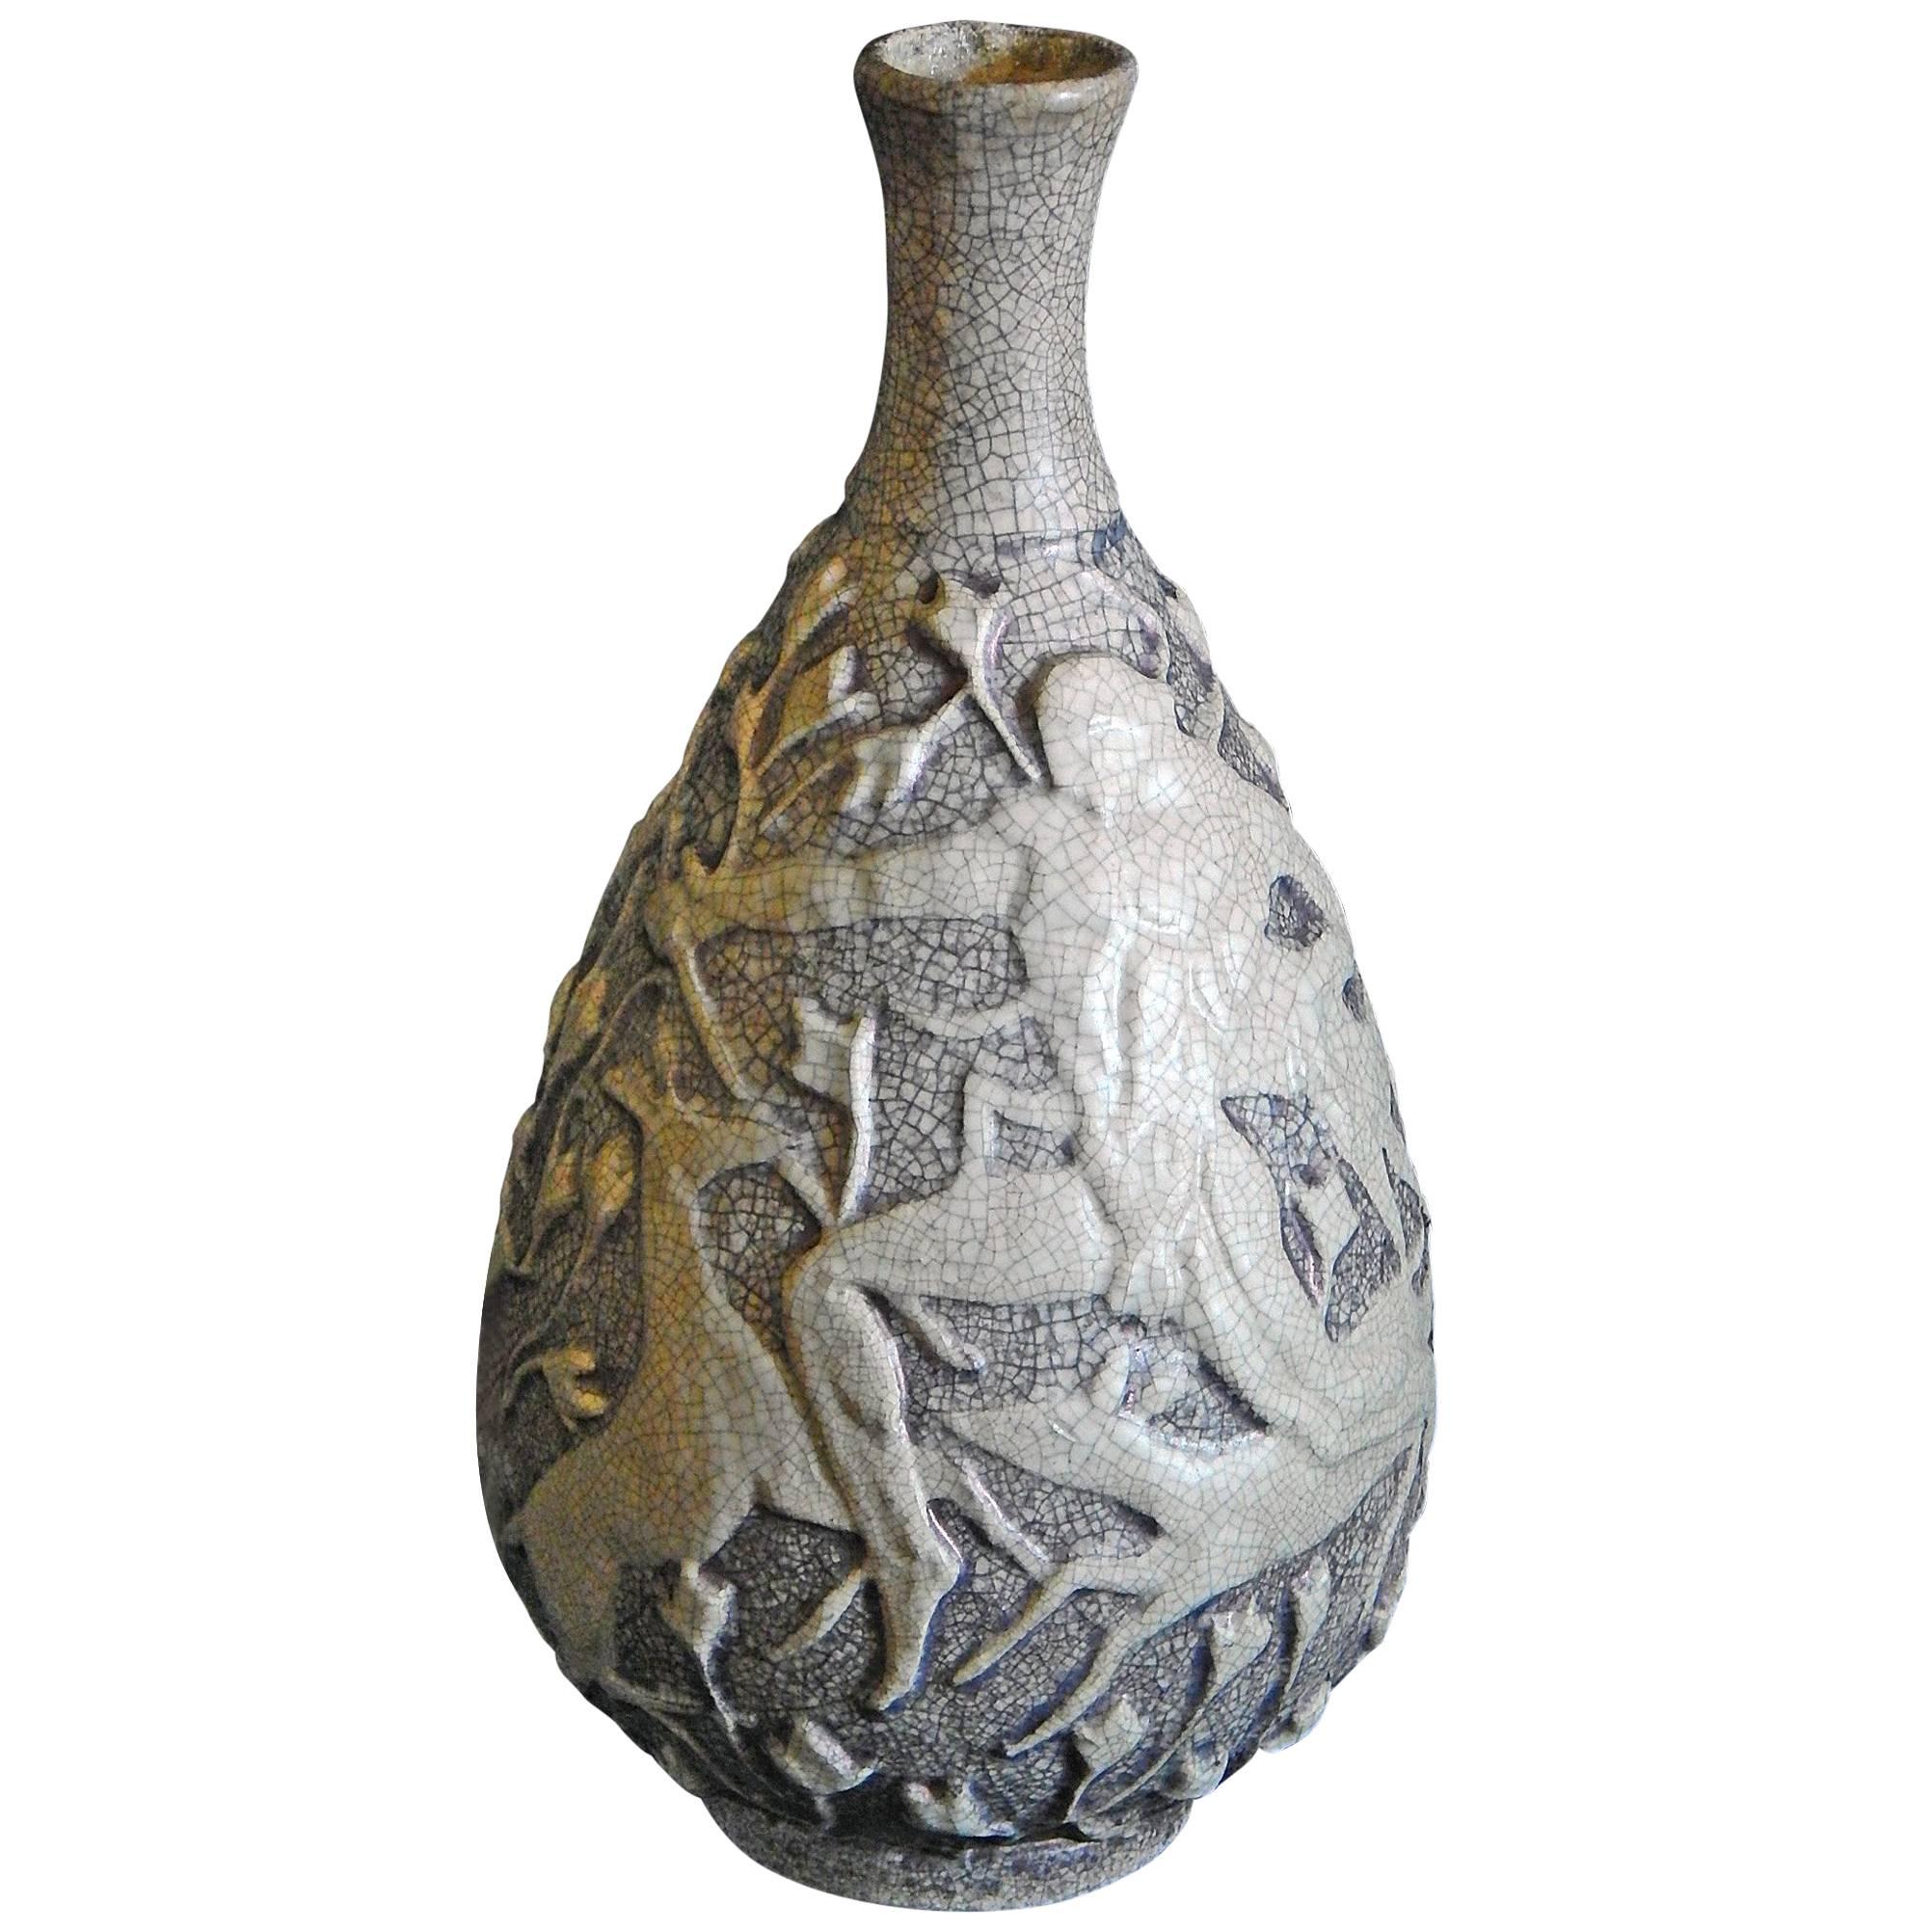 A highly unusual vase by Jean Mayodon, one of France's leading artists in the Art Deco era, this piece depicts two scenes of nude male hunters with several deer. One of the hunters is shown with a large, arching bow - a classic theme favoured by